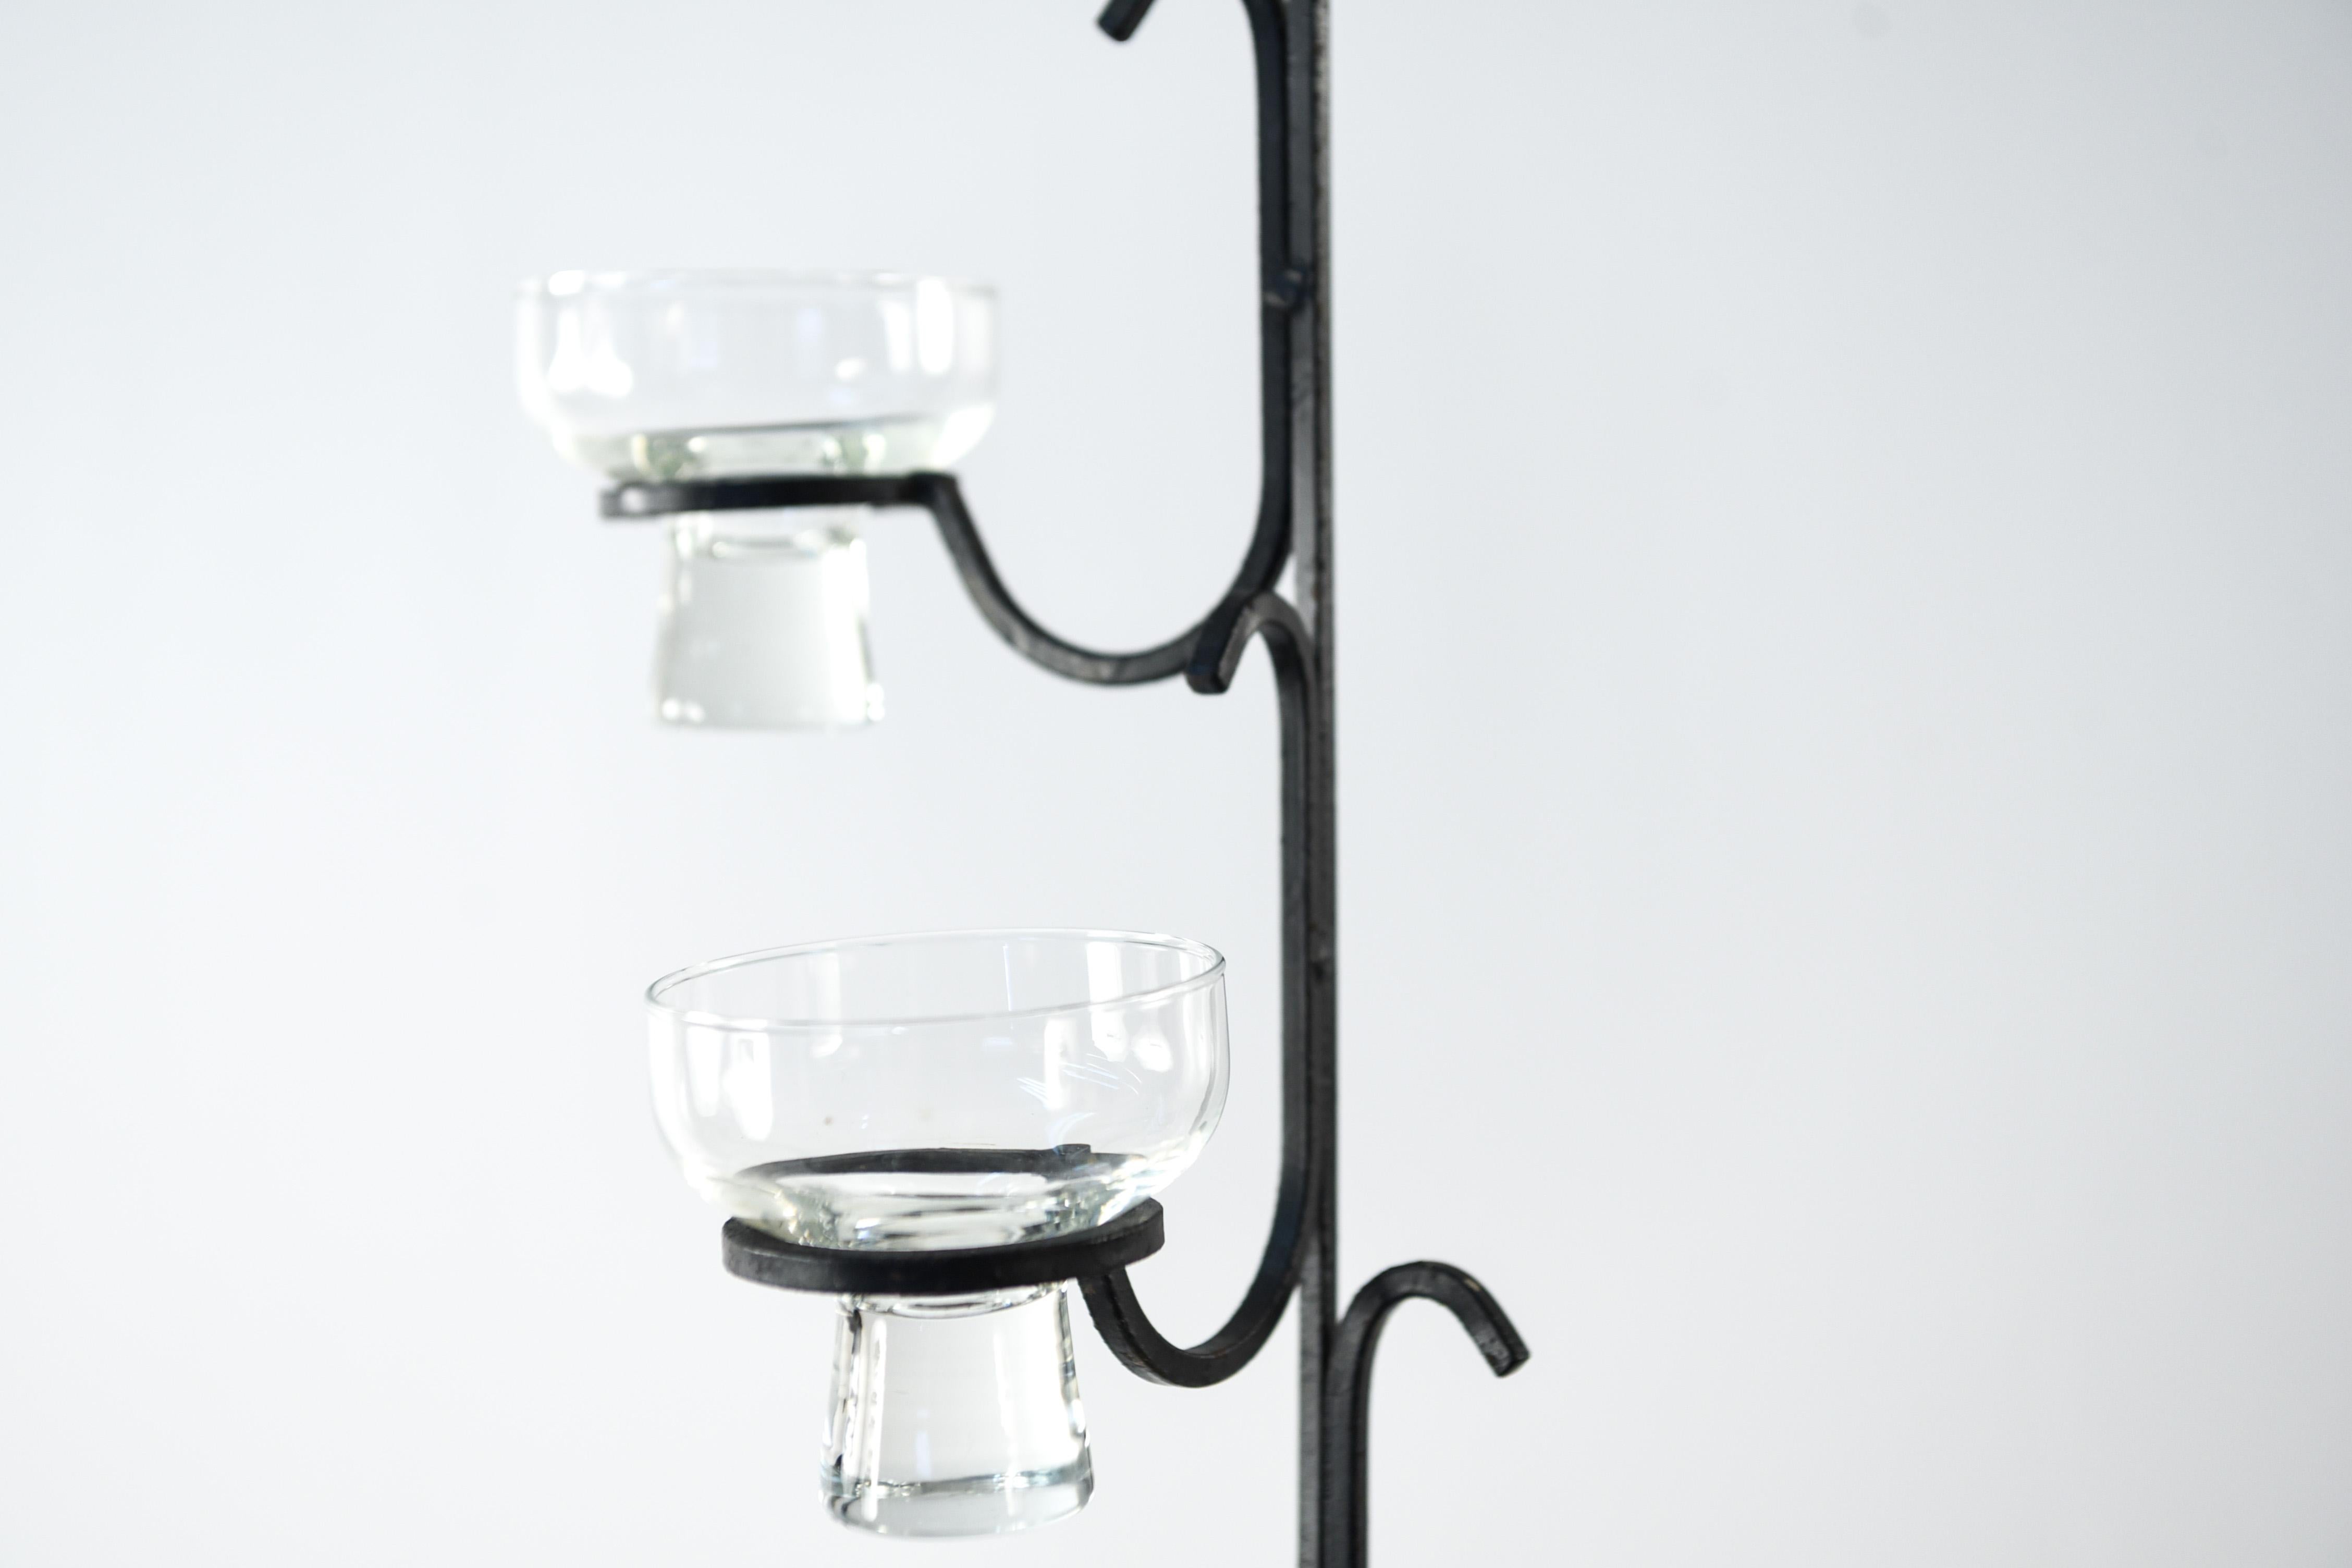 This 1970s Danish chandelier has an interesting vertical form made of steel. This piece features glass inserts to hold candles and has a charming, rustic appearance to it.